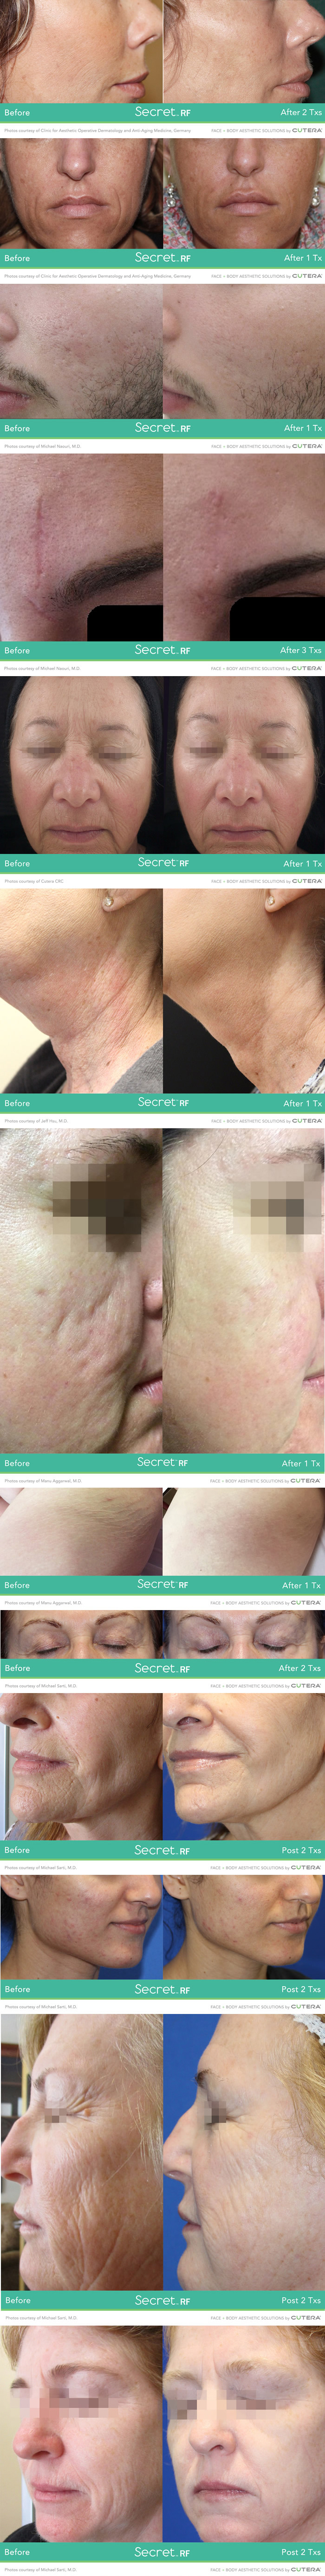 SKIN TREATMENT Before and After